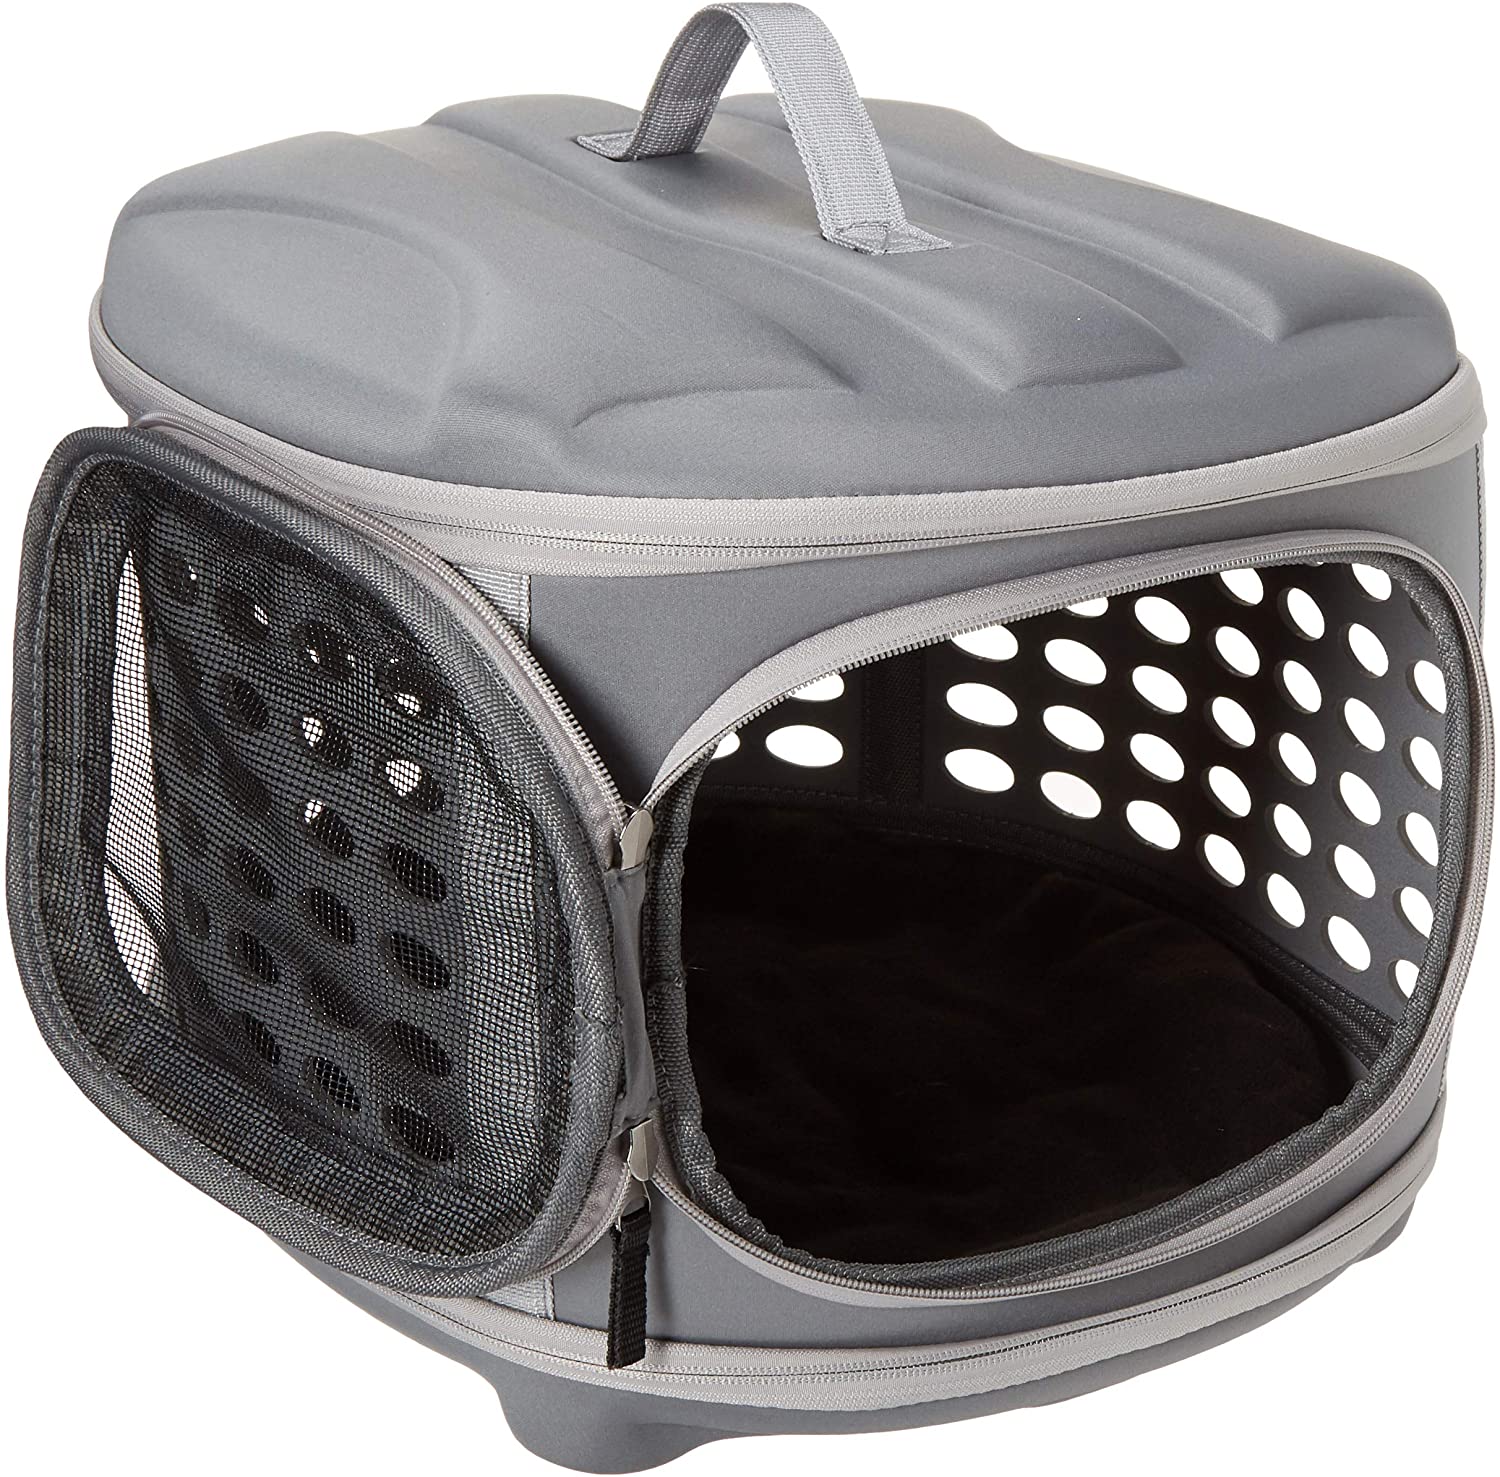 Pet Magasin Hard Cover Collapsible Cat Carrier - Pet Travel Kennel with Top-Load & Foldable Feature for Cats, Small Dogs Puppies & Rabbits